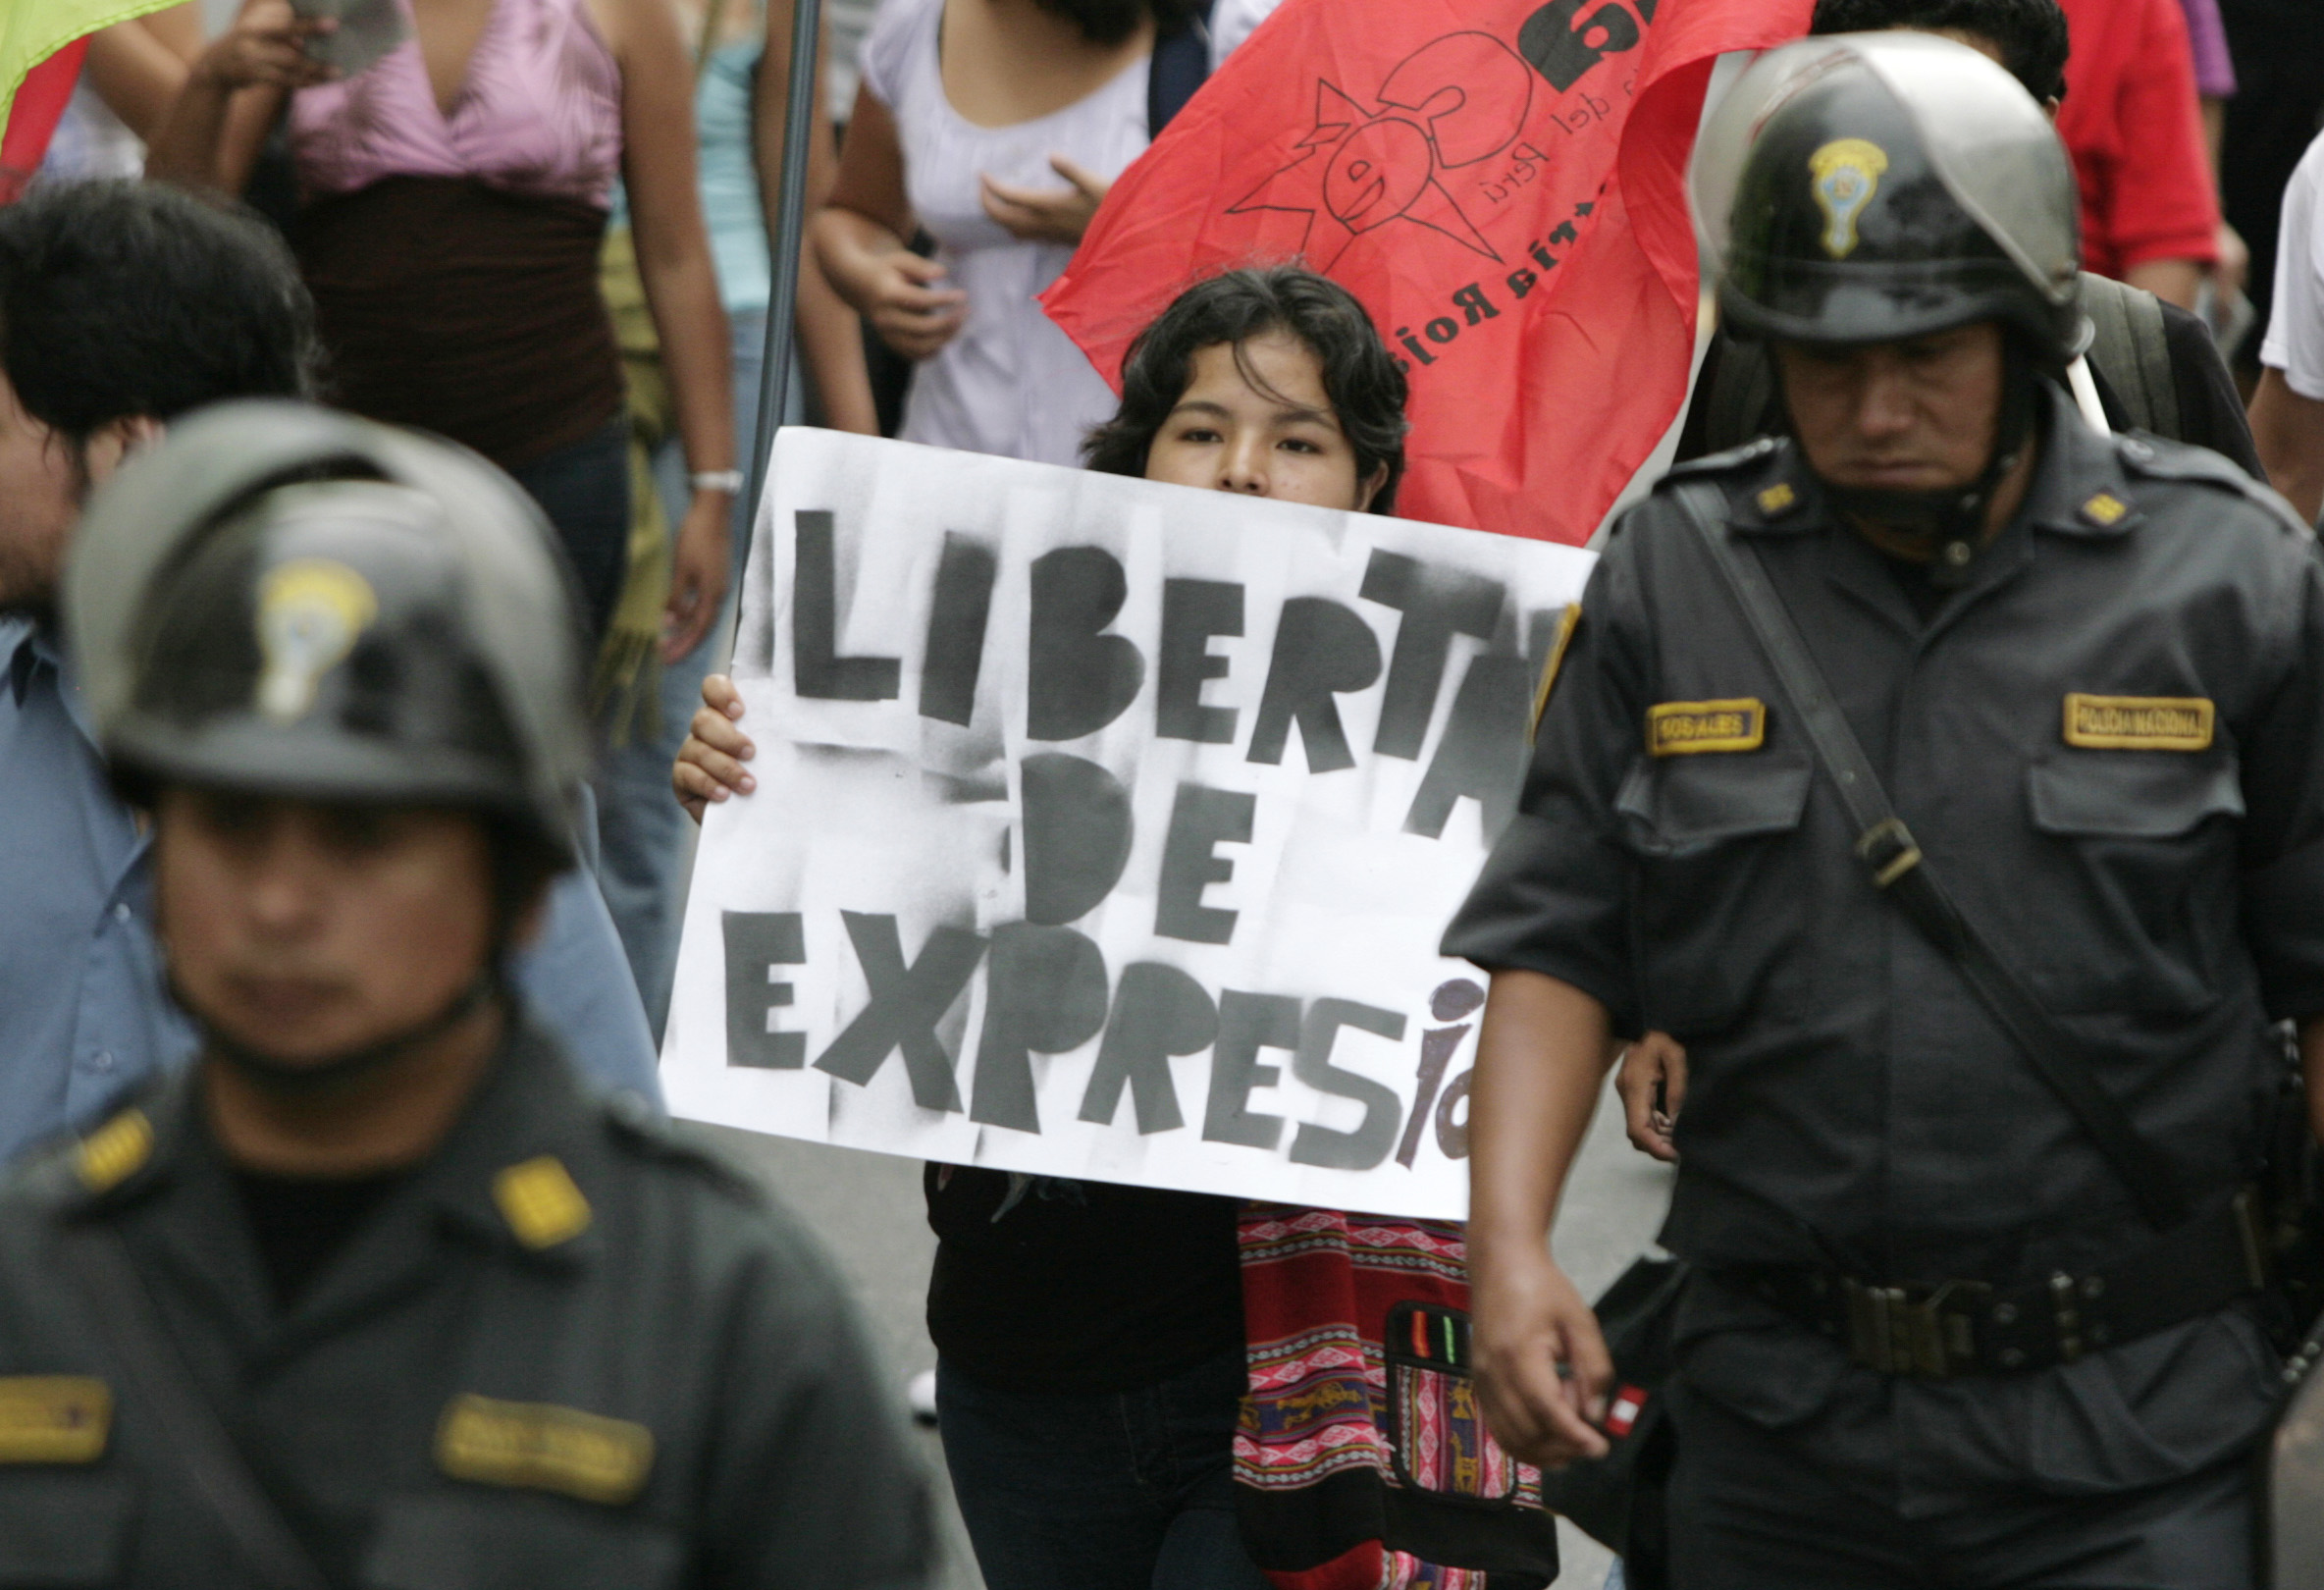 A Peruvian indigenous protestor holds a banner that reads 'Freedom of Expression' in Spanish during a march in Lima